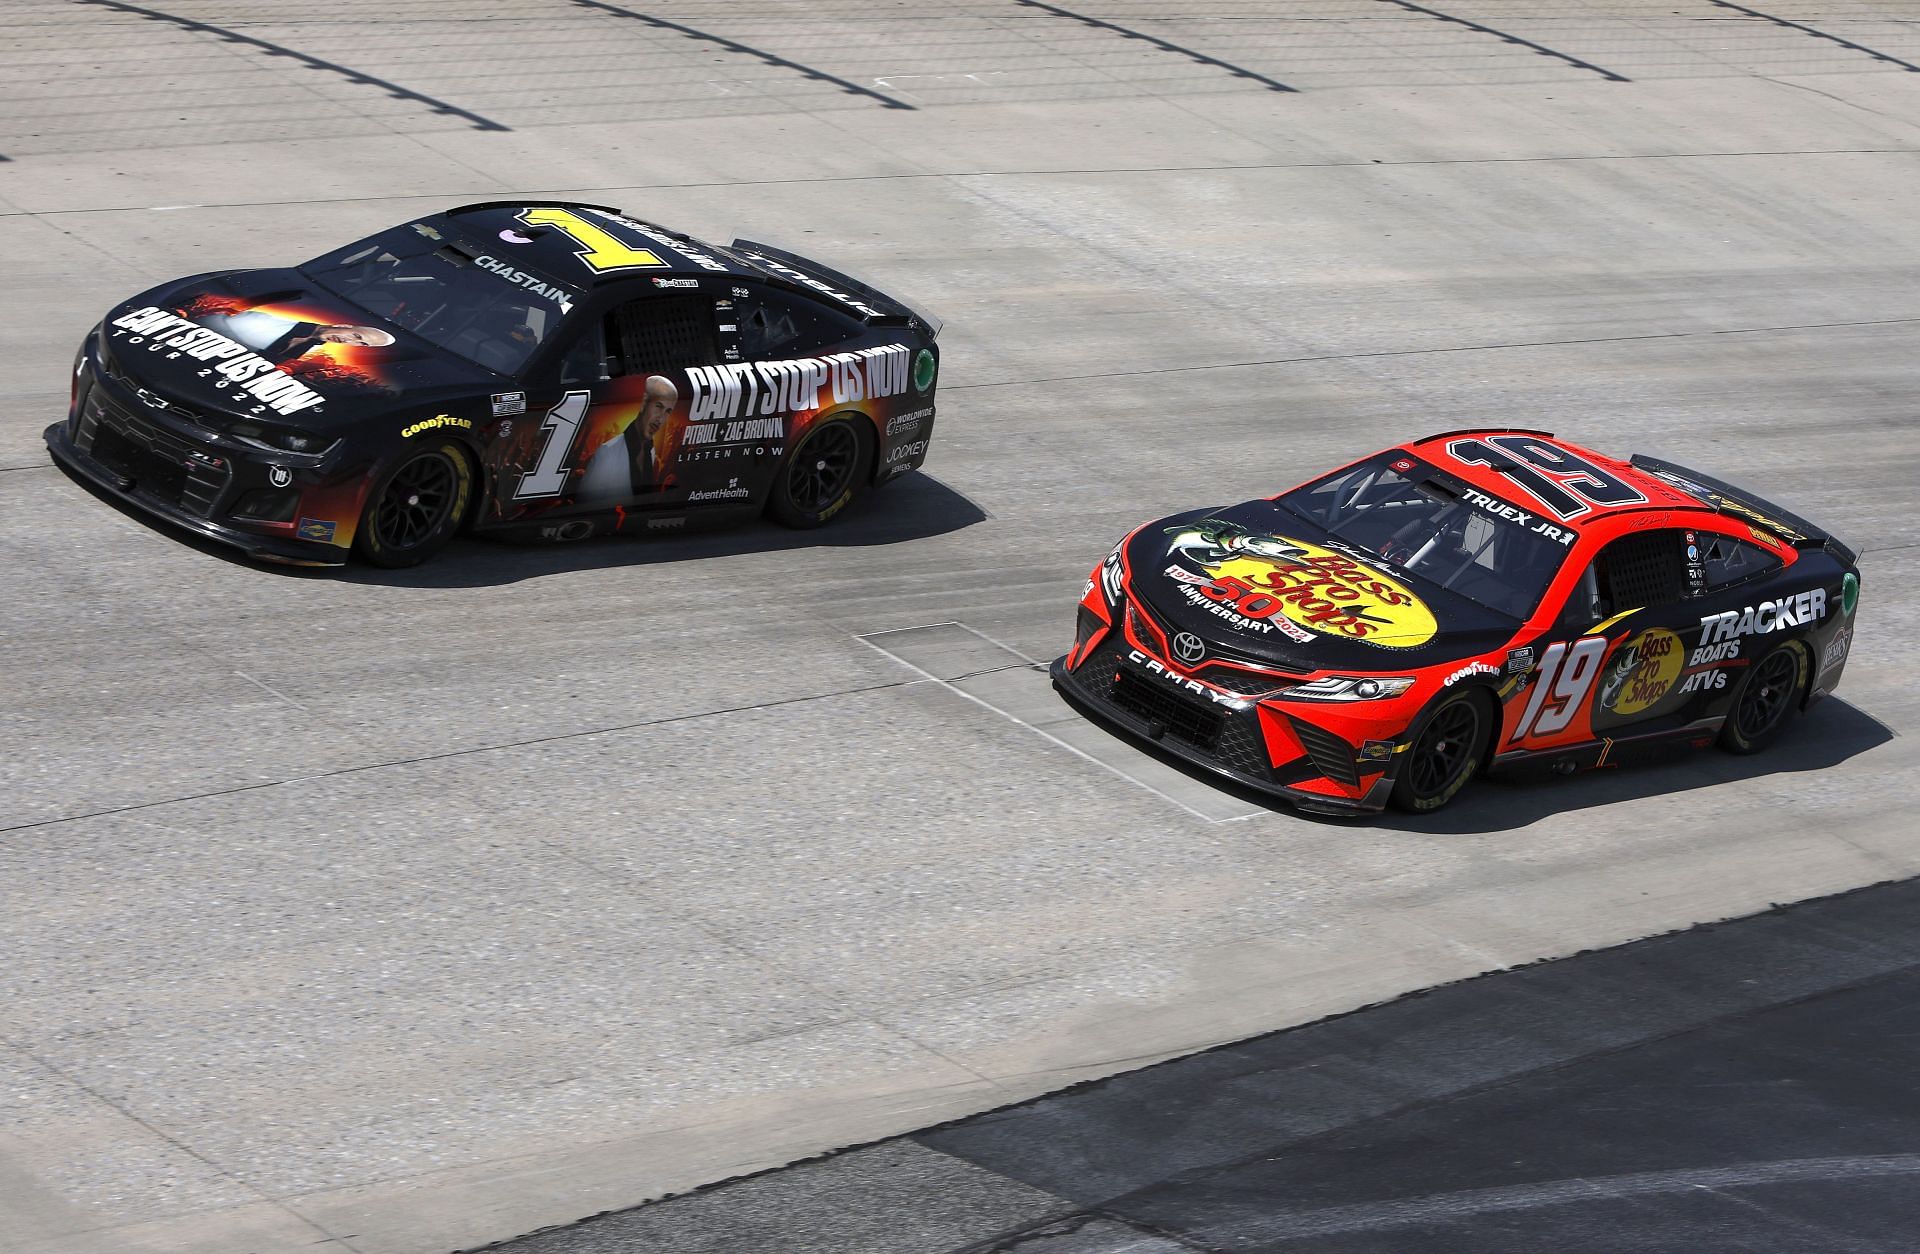 Ross Chastain and Martin Truex Jr. race during the NASCAR Cup Series DuraMAX Drydene 400 presented by RelaDyne at Dover Motor Speedway.